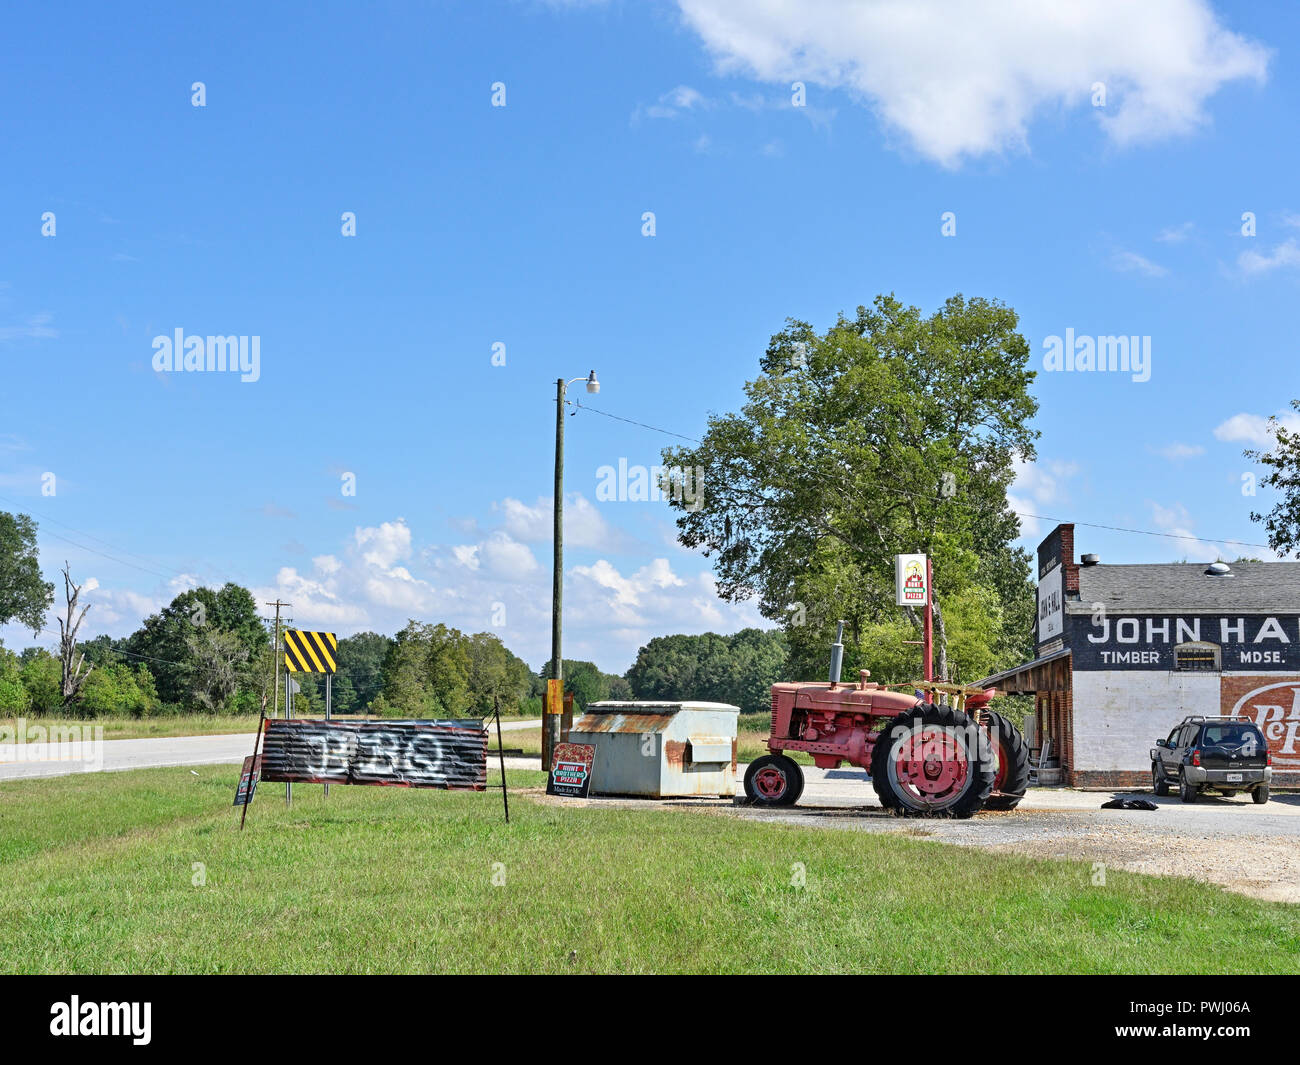 Rural Alabama BBQ or Bar-B-Que restaurant or roadside store with homemade sign by the country road in Cecil Alabama, USA. Stock Photo